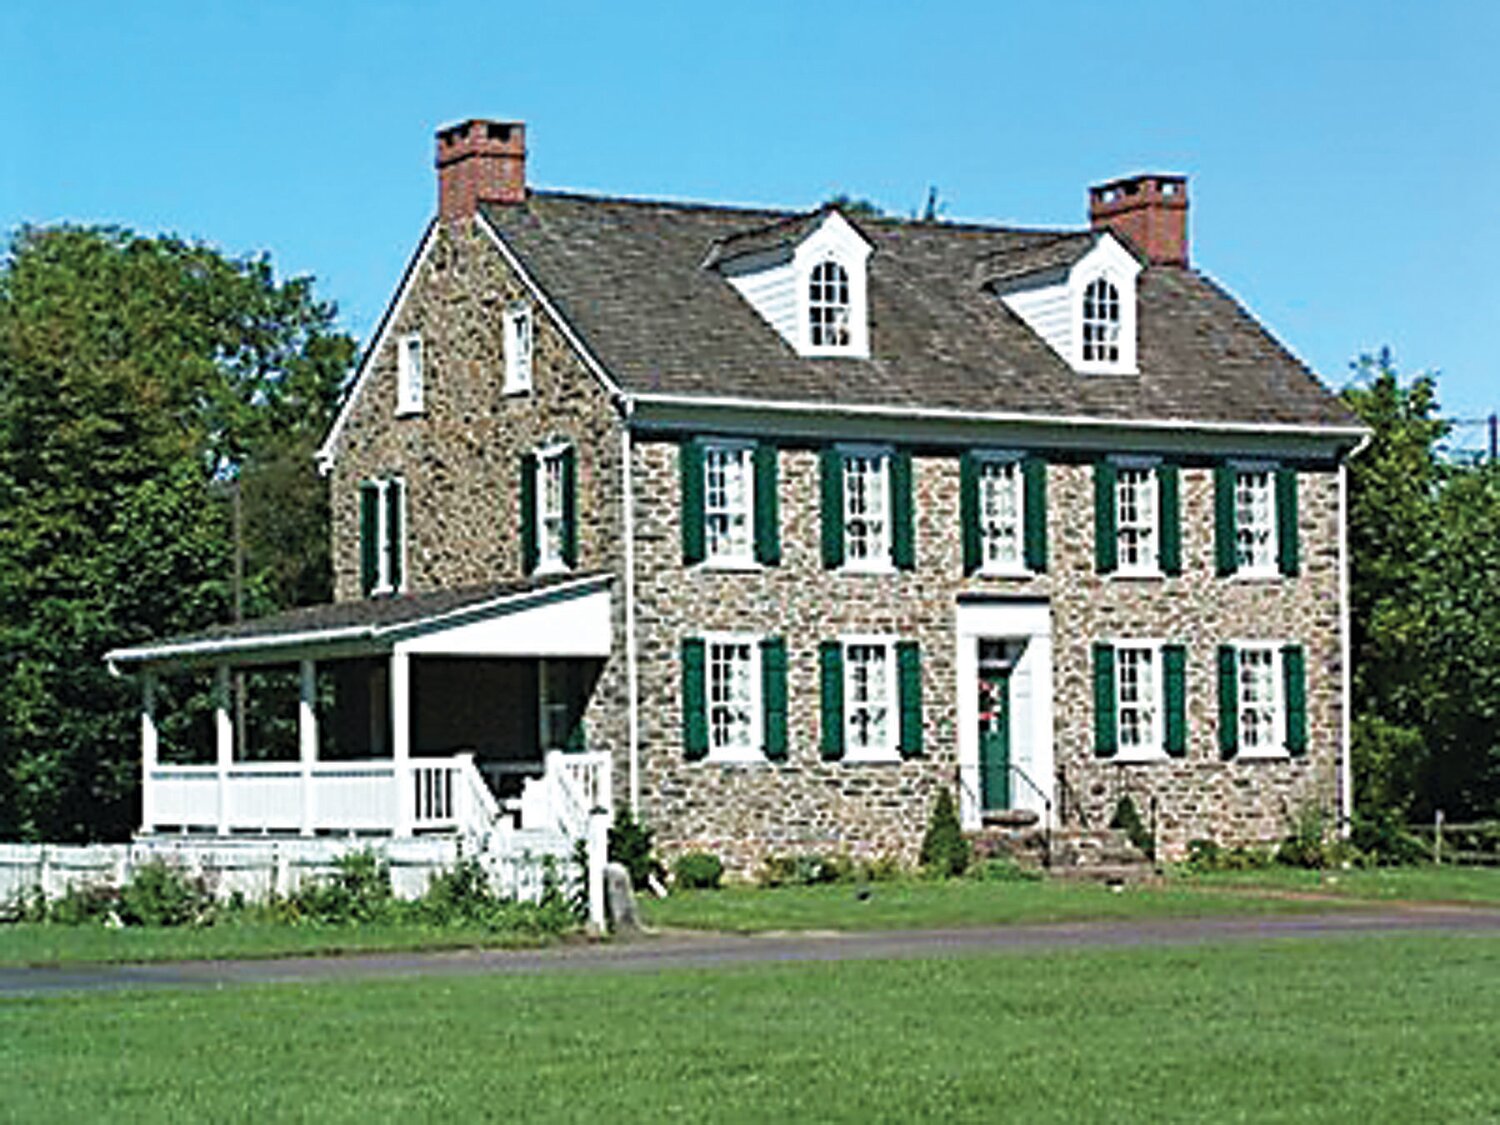 Today, the Burgess Foulke House is home base for the Quakertown Historical Society.